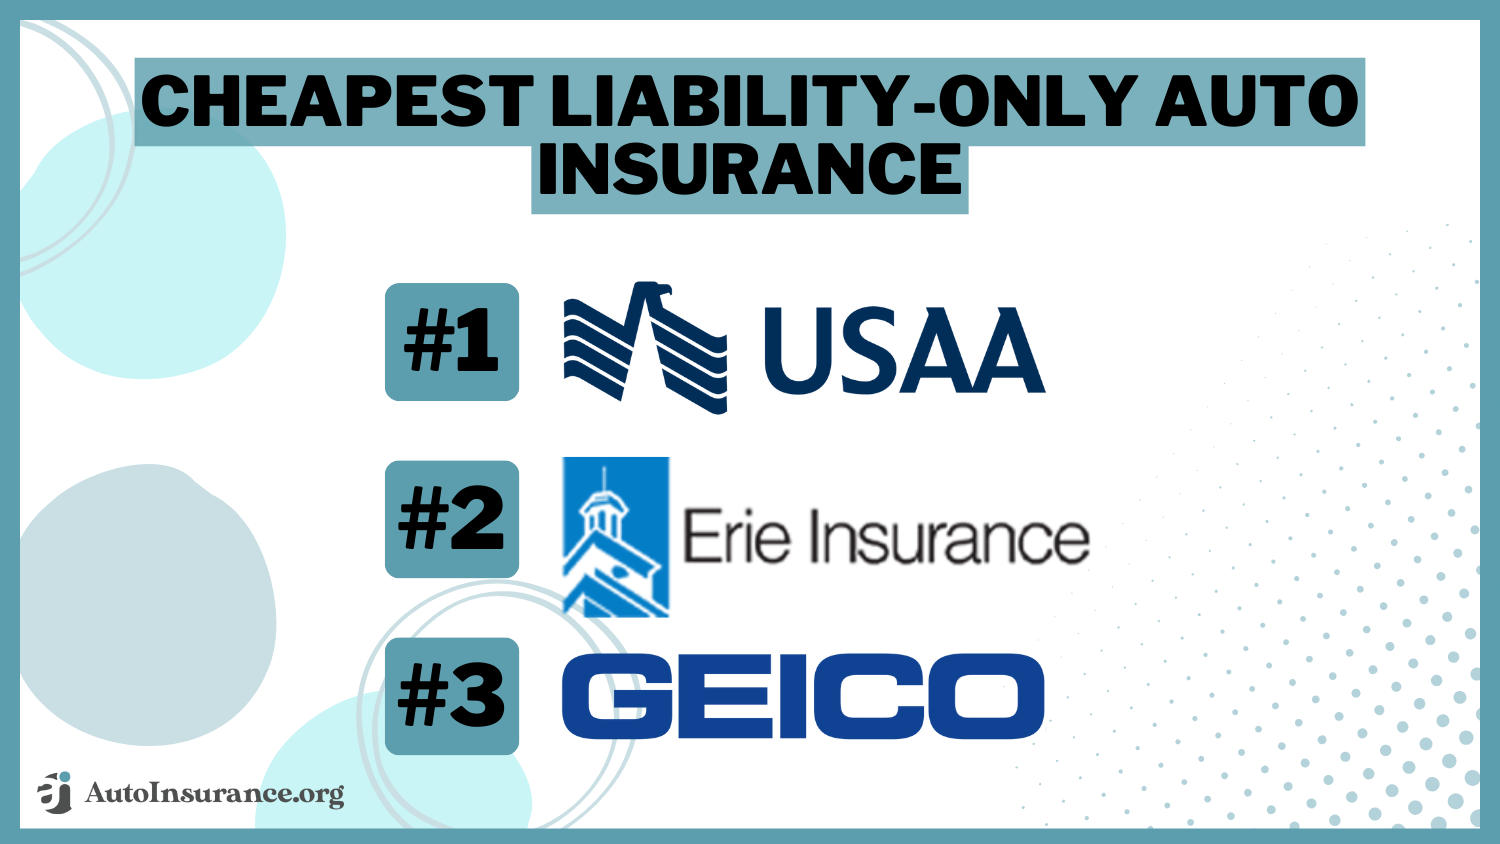 Cheapest Liability-Only Auto Insurance: USAA, Erie, Geico